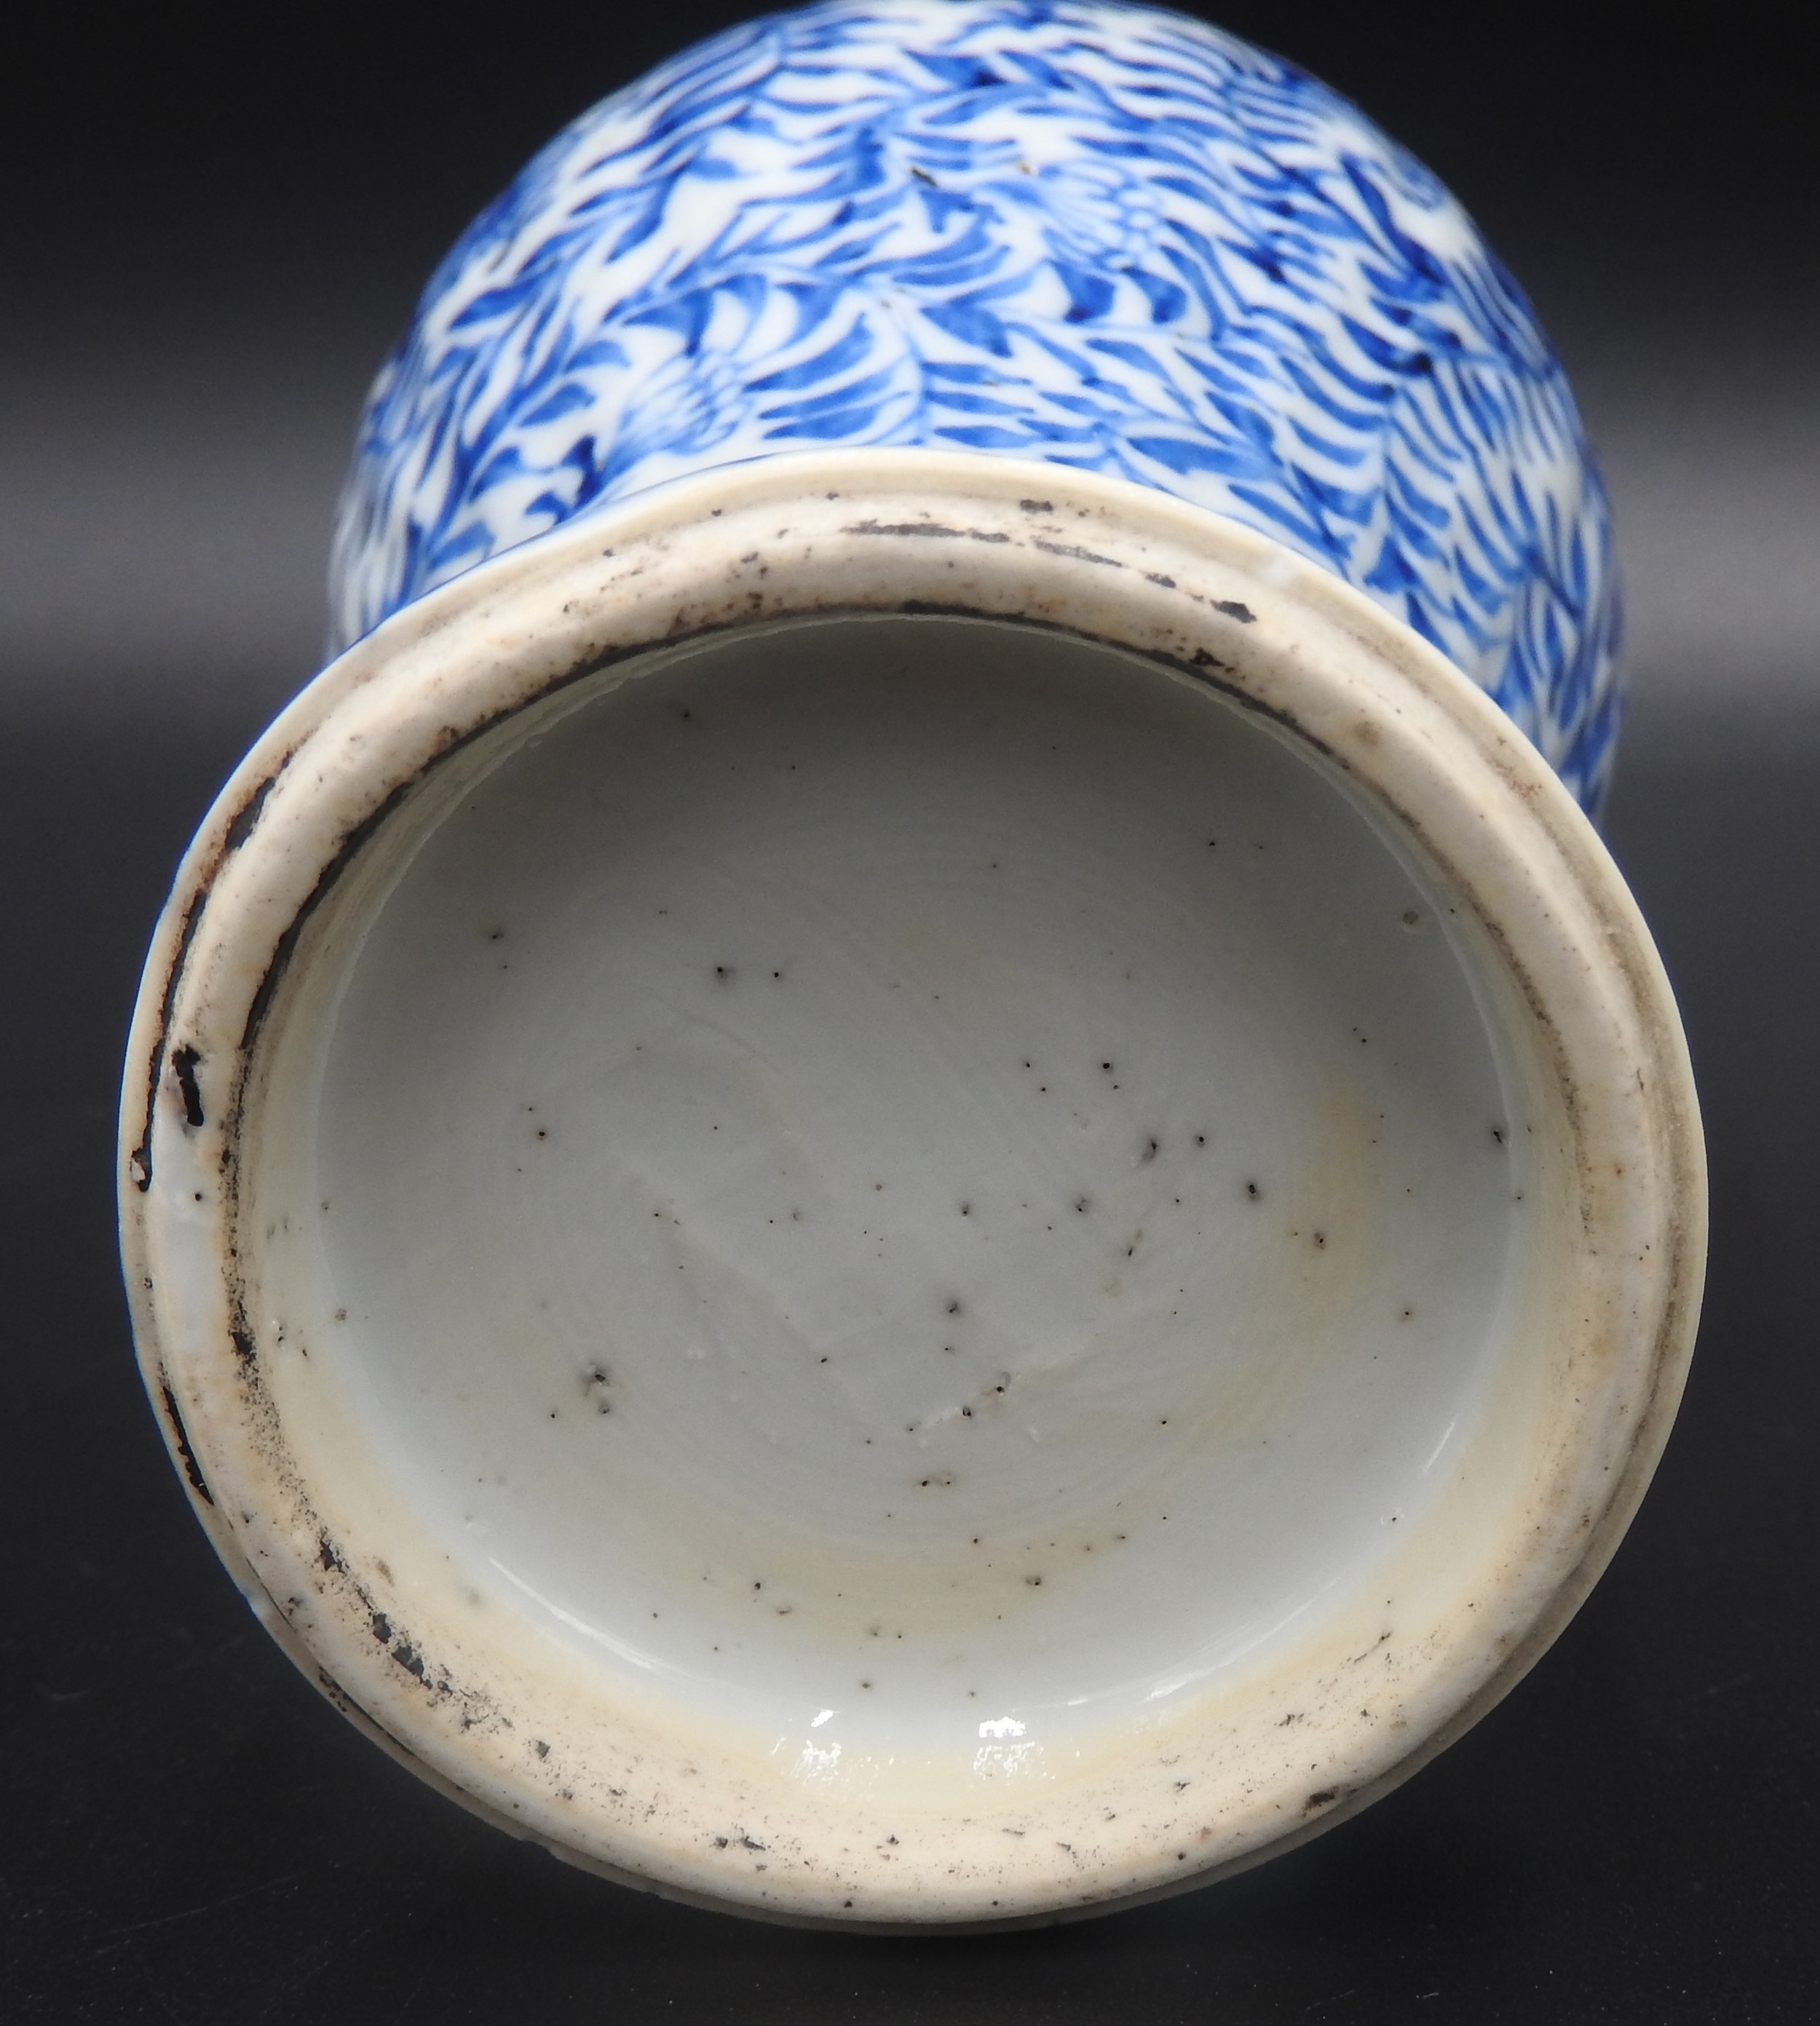 A BLUE AND WHITE MEIPING VASE, QING DYNASTY, LATE 18TH / EARLY 19TH CENTURY - Image 2 of 2